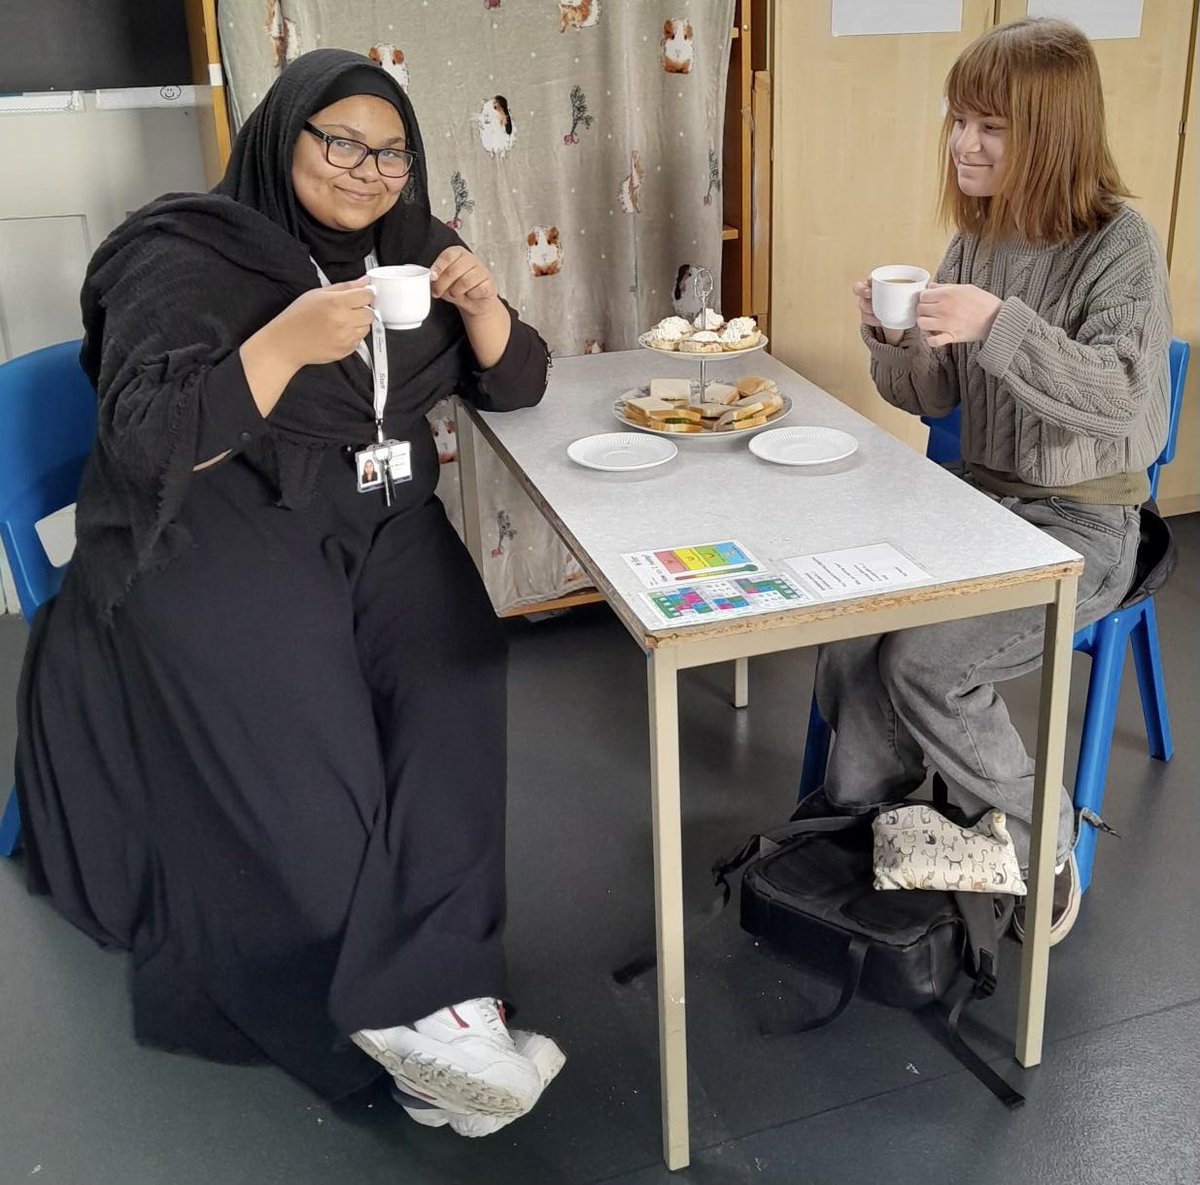 Afternoon tea at The Vista Campus during enrichment this afternoon! Very civilised. #growlearnachieve